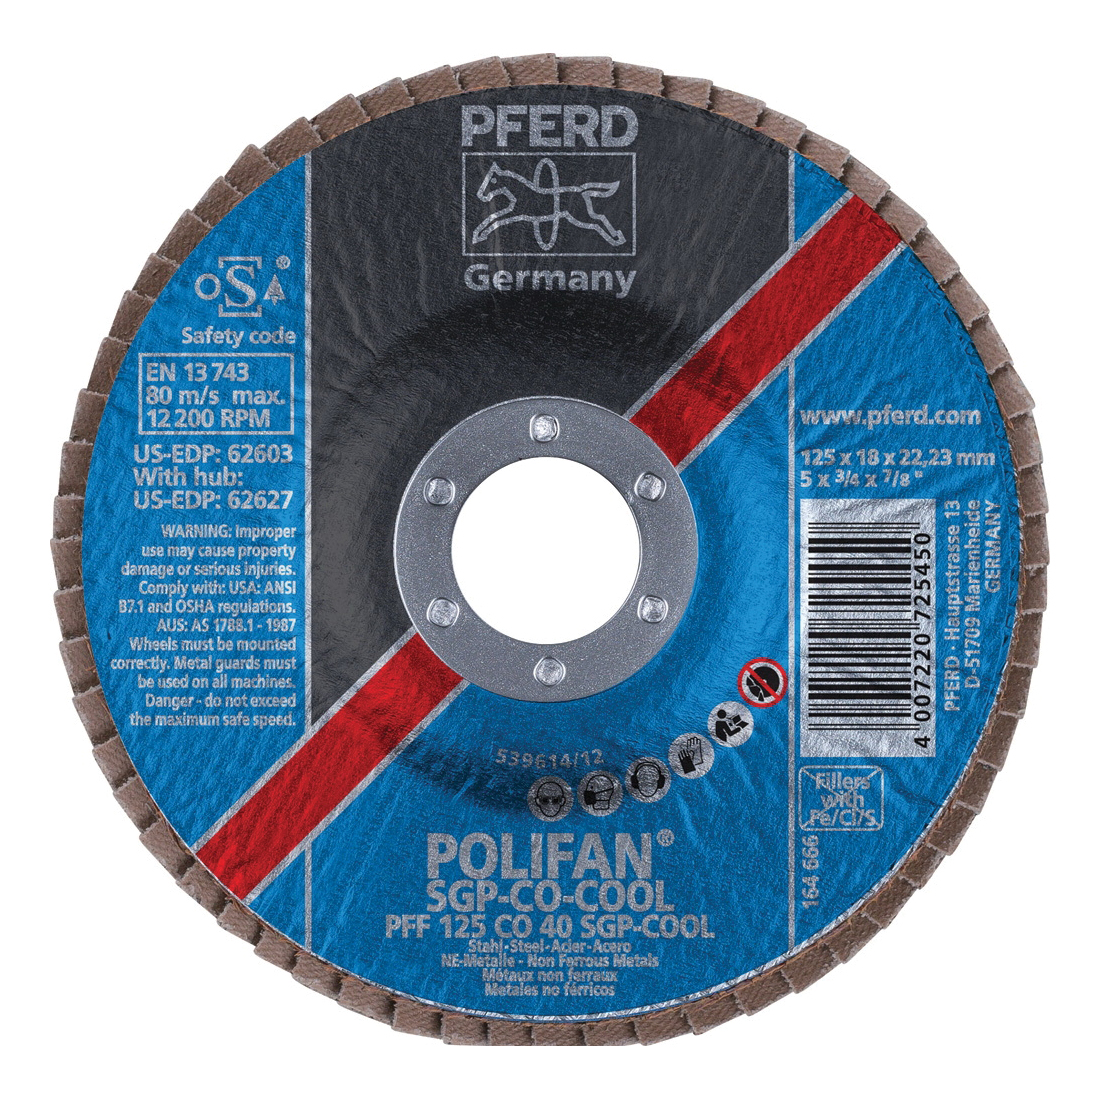 PFERD Polifan® 62603 Special Line SGP CO-COOL Unthreaded Coated Abrasive Flap Disc, 5 in Dia, 7/8 in Center Hole, 40 Grit, Ceramic Oxide Abrasive, Type 27 Flat Disc